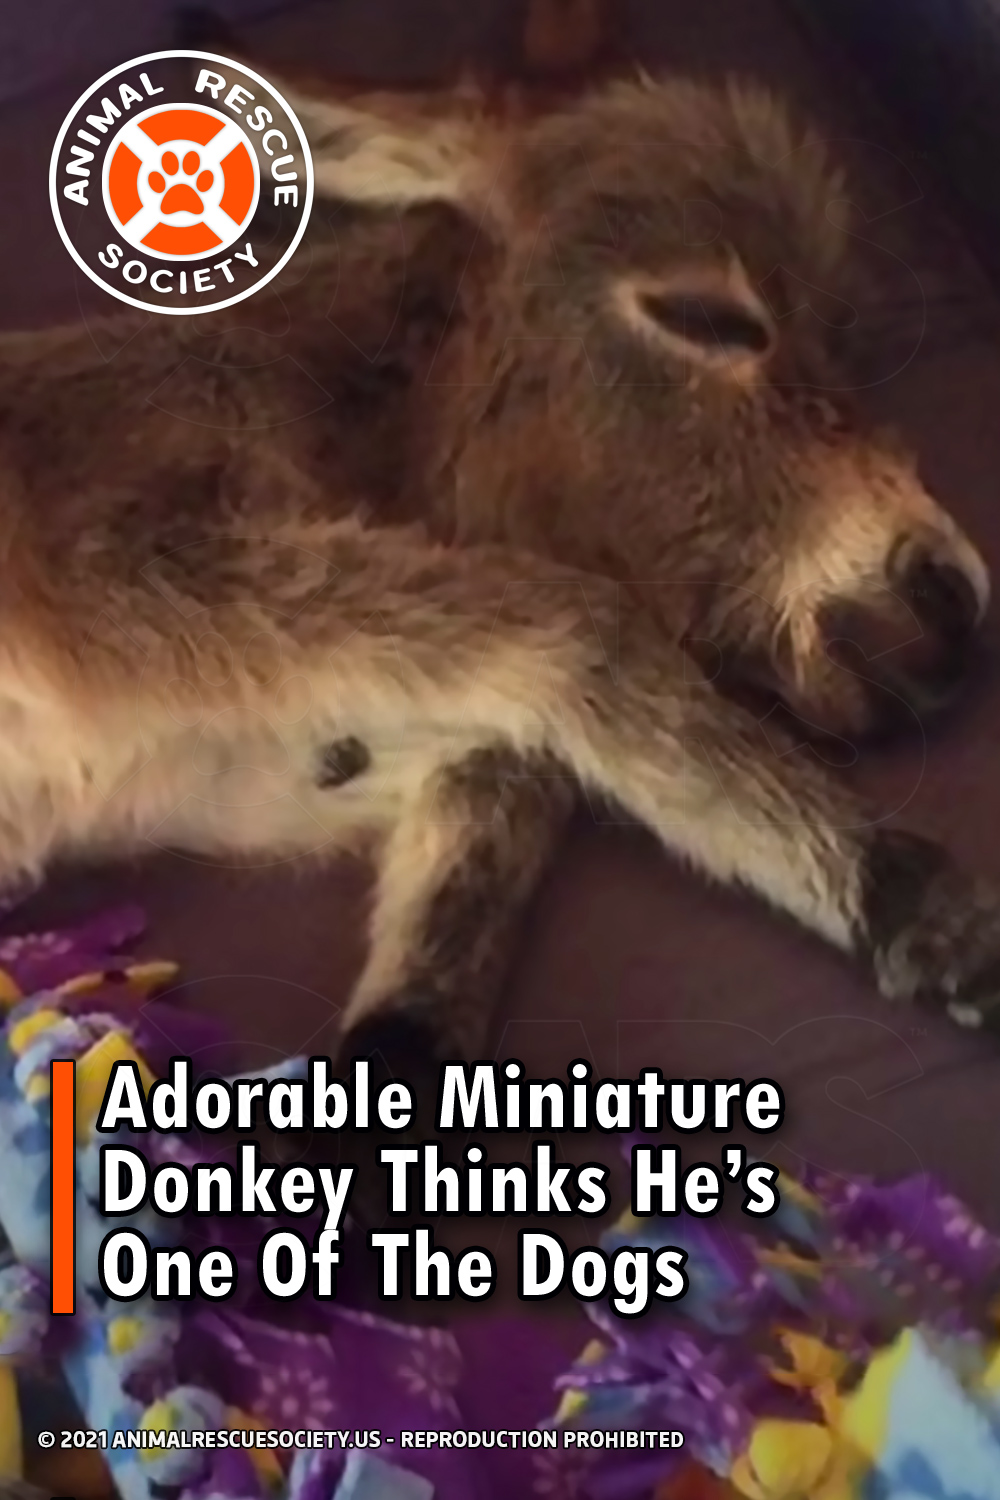 Adorable Miniature Donkey Thinks He’s One Of The Dogs